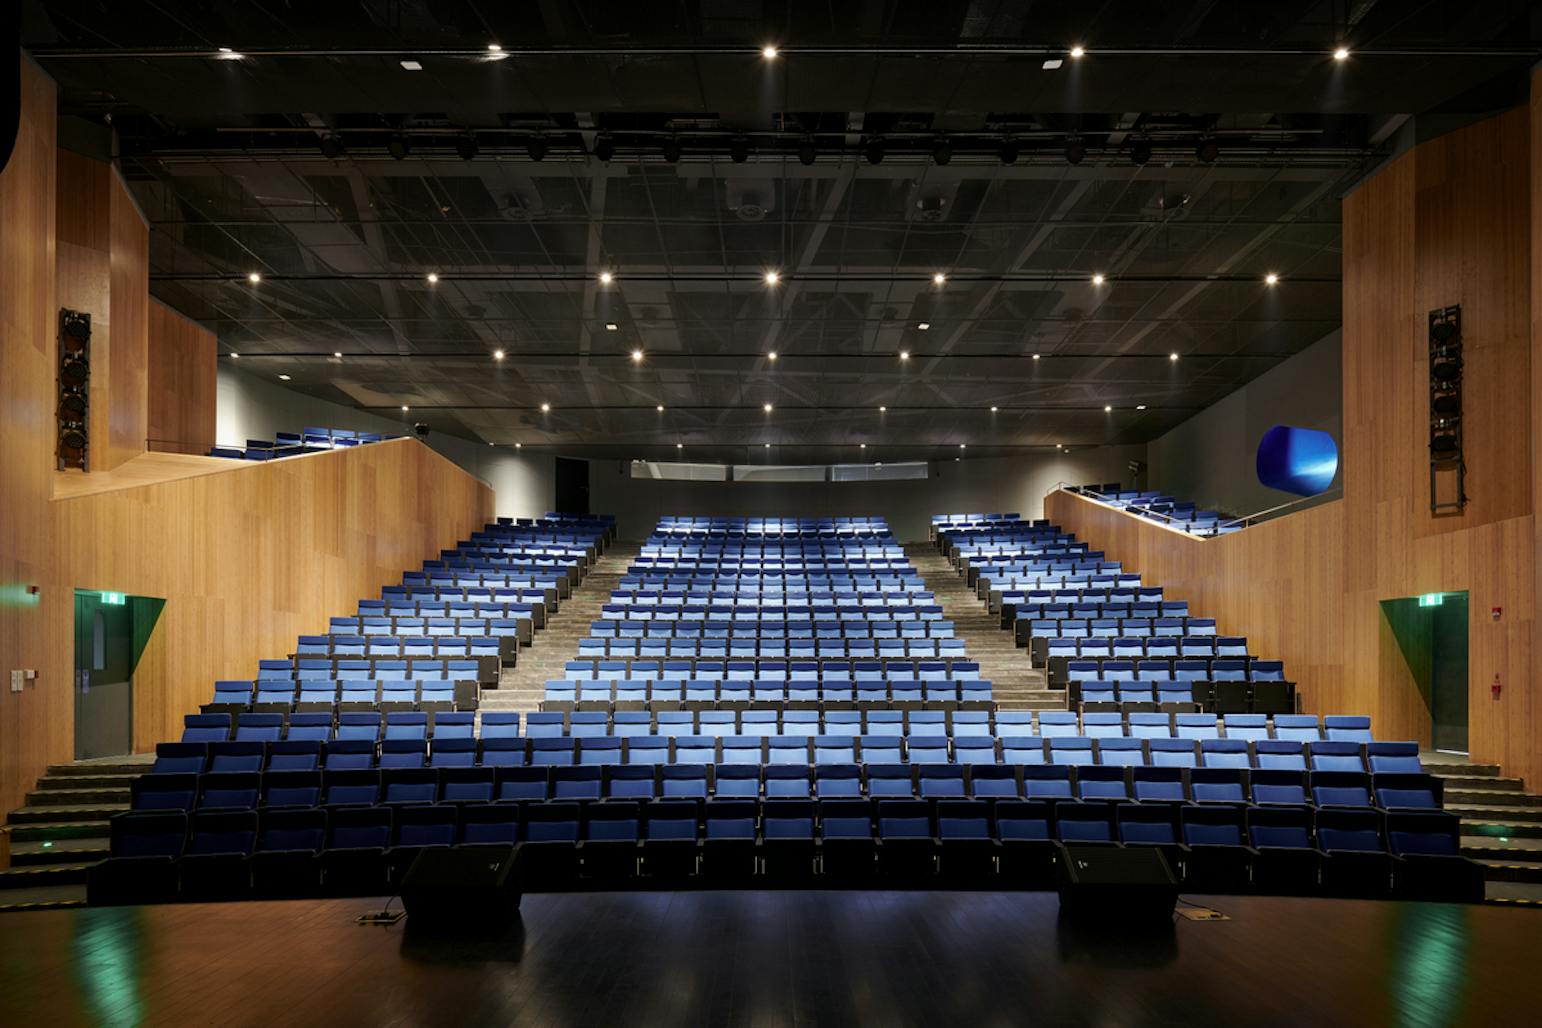 Open Architecture combines Library and Theatre in "Blue Whale" BIBLIOTHEATER. Школа Qingpu Pinghe. Shanghai Qingpu Pinghe International School Masterplan. Shanghai Qingpu Pinghe International School. Theater library